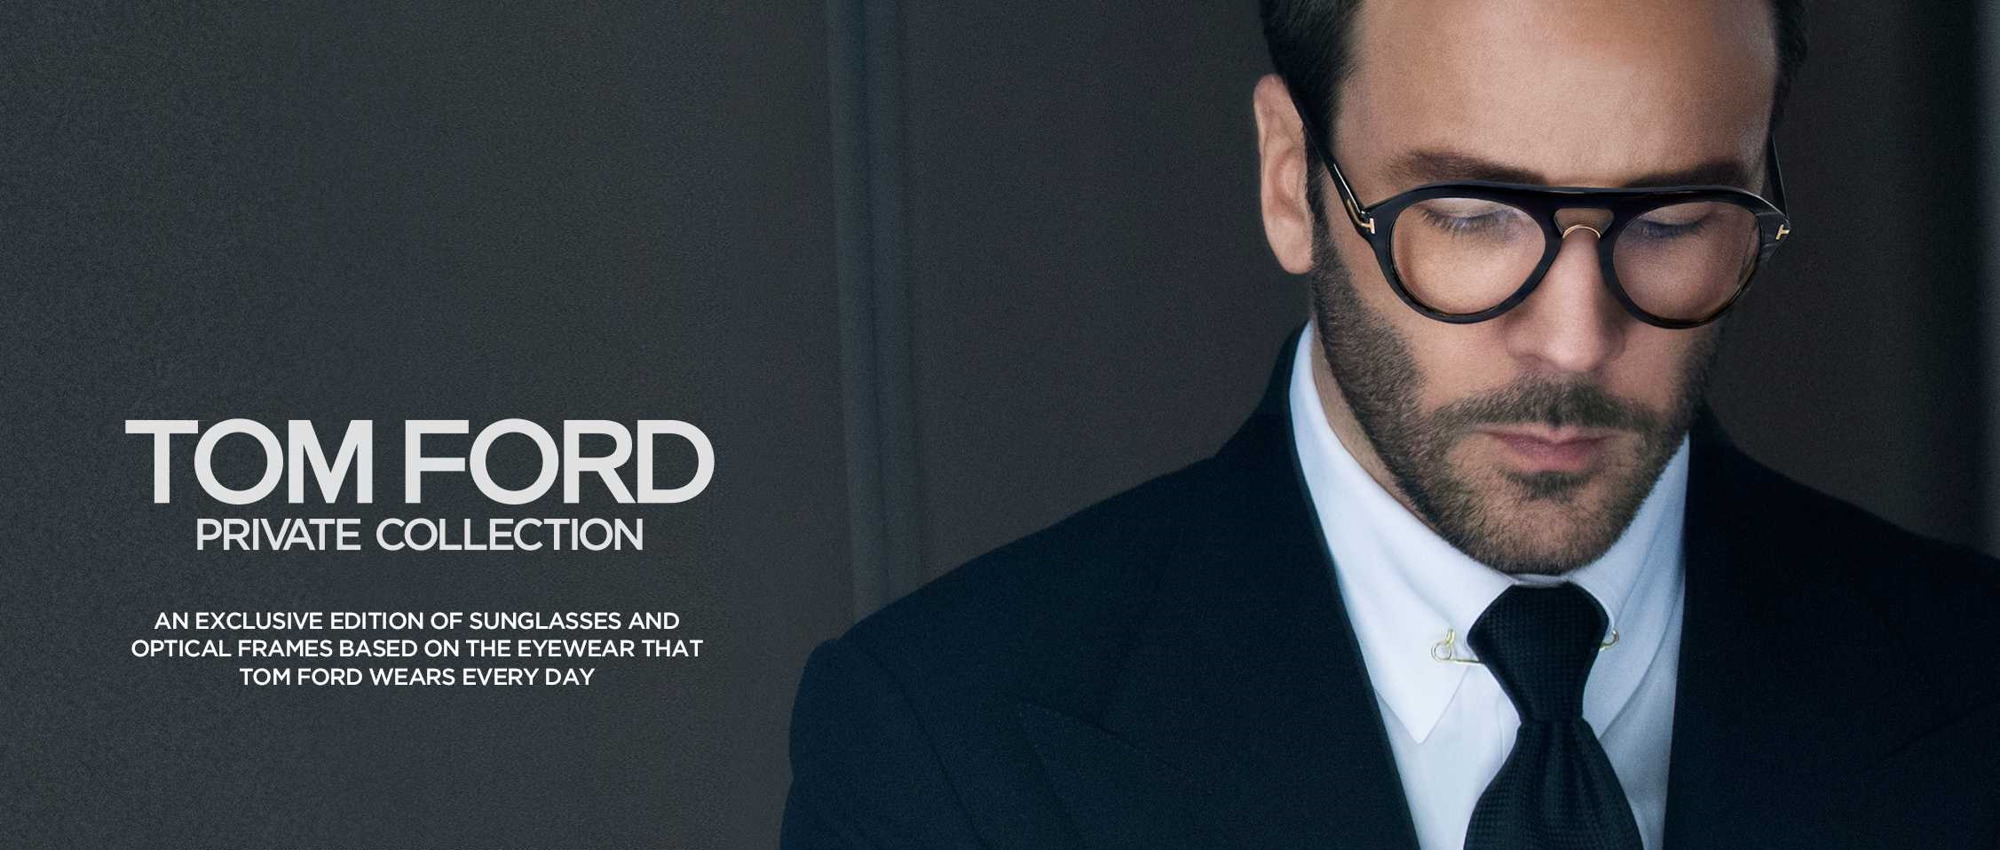 Tom Ford Private Collection – Designer Eyes